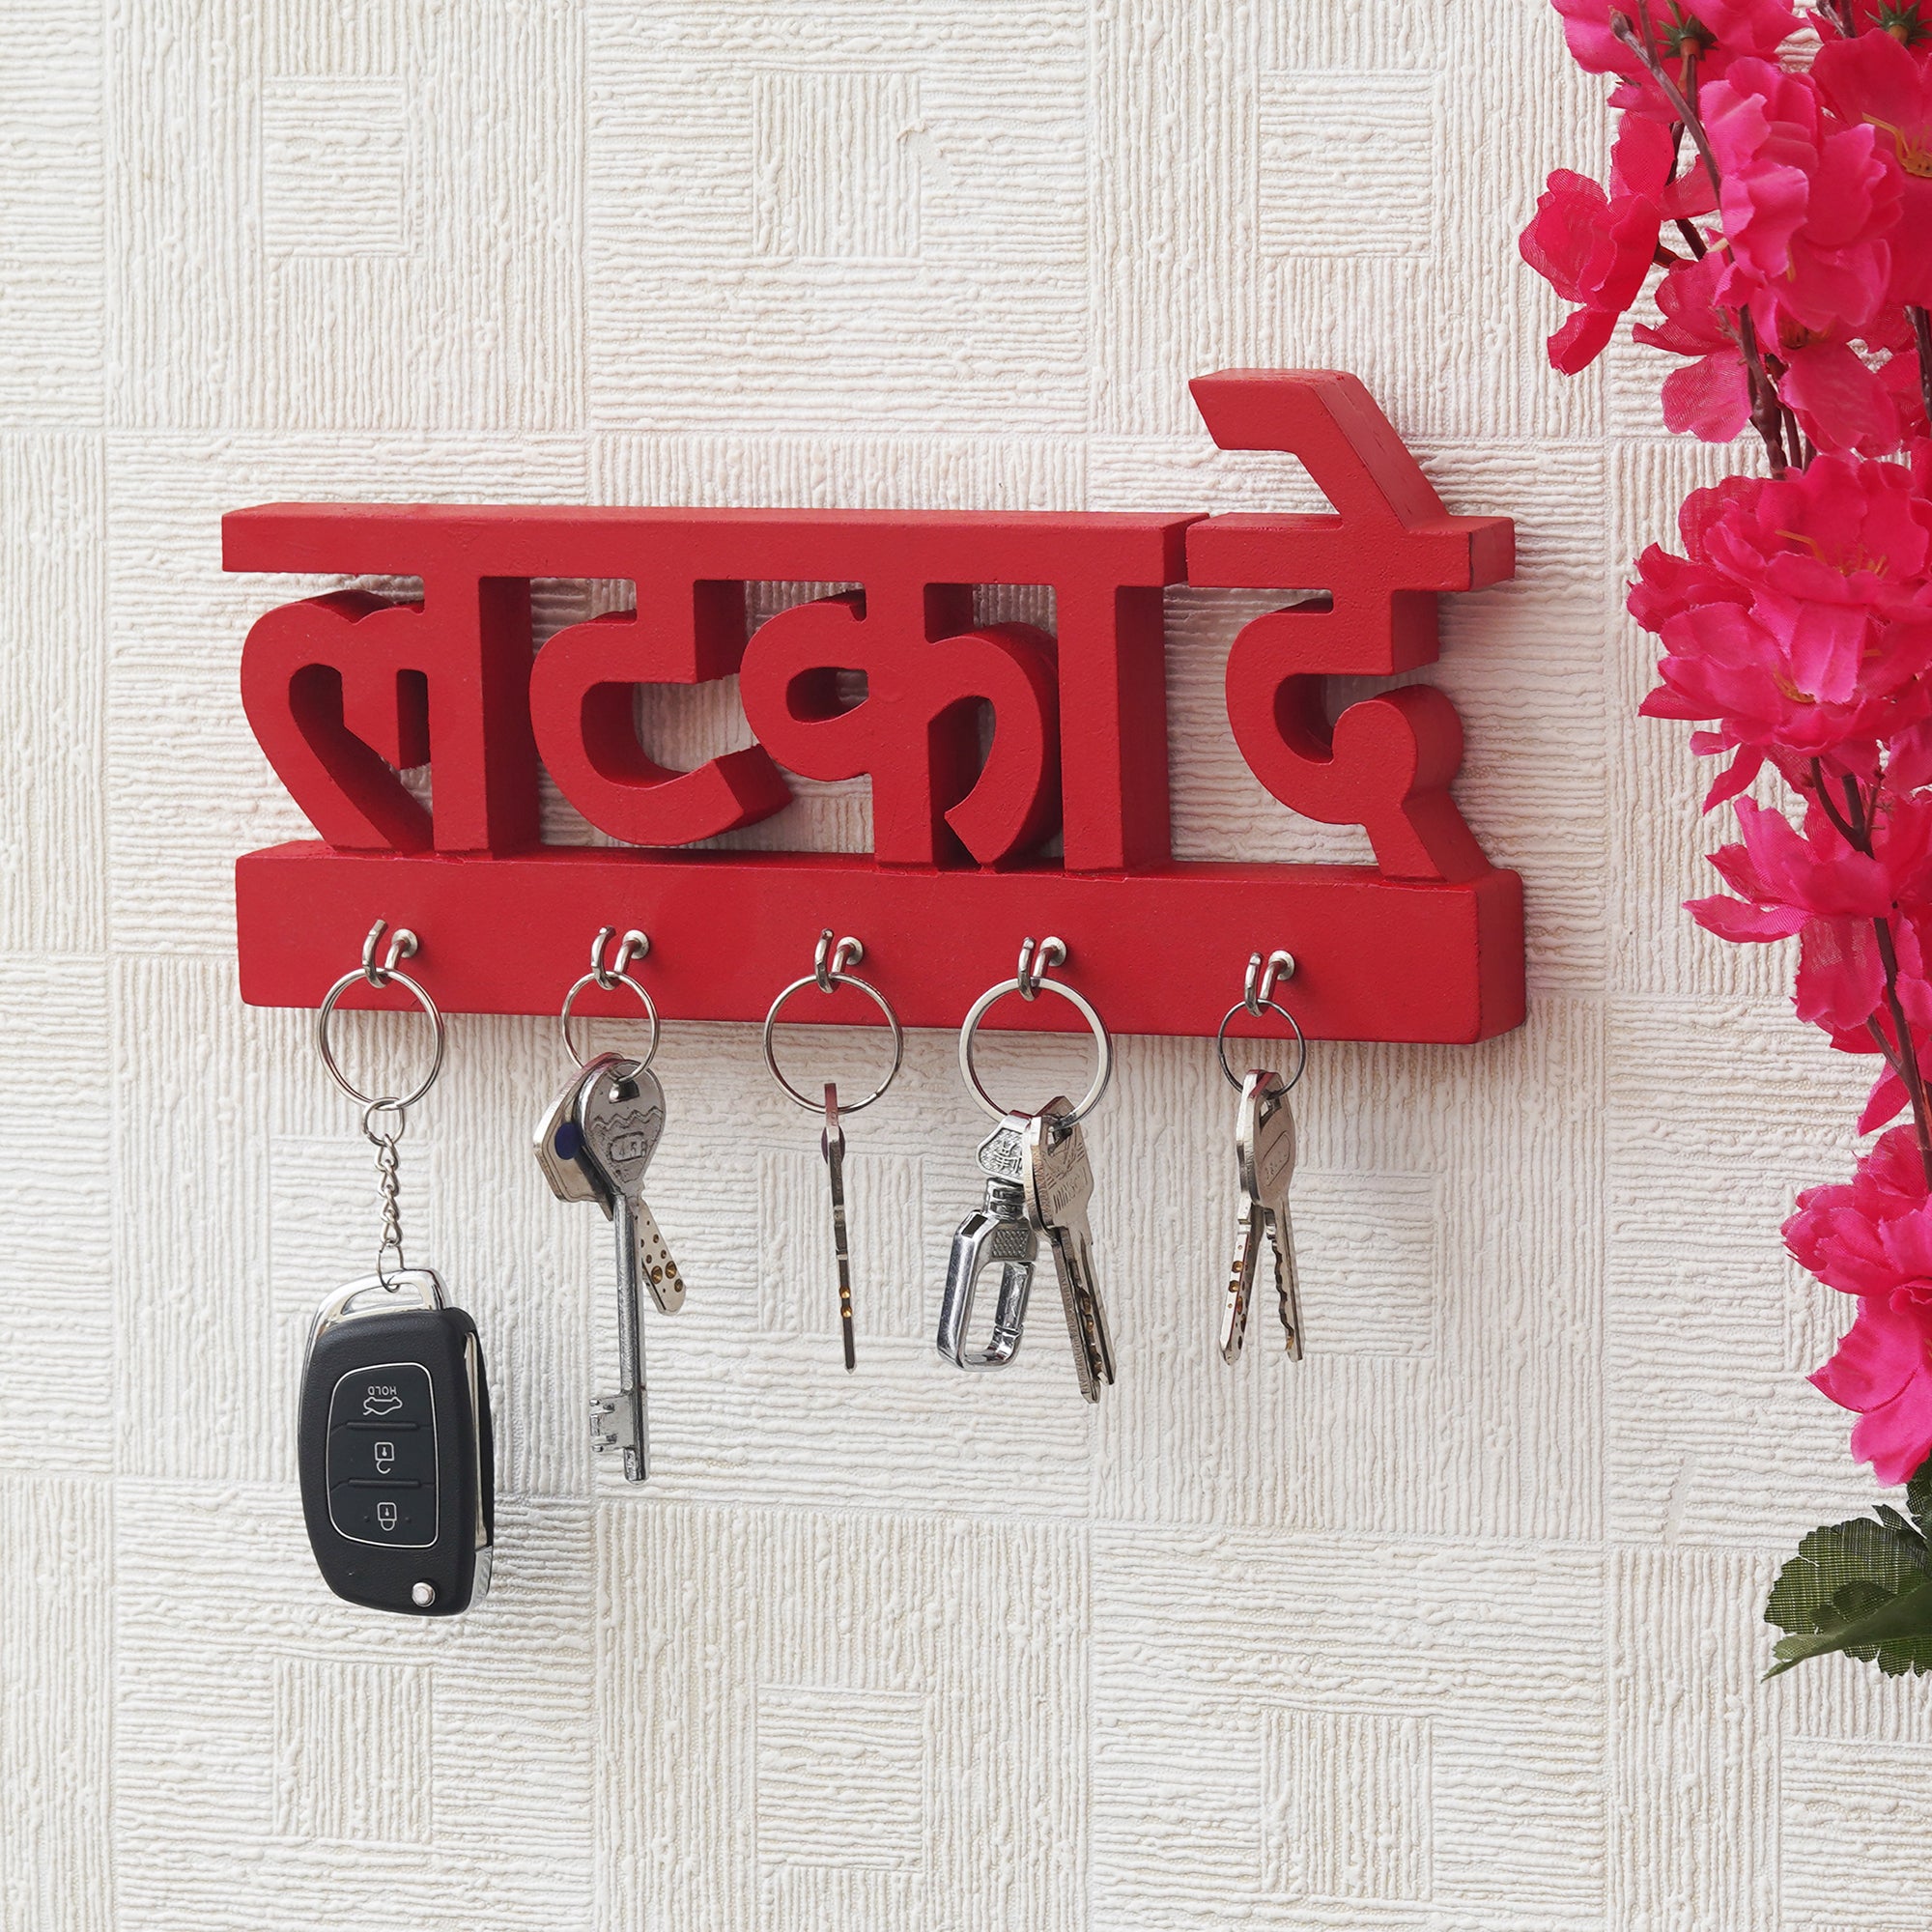 eCraftIndia Red "Latka De" Decorative Wooden Cutout Key Holder with 3 Key Hooks For Wall 1